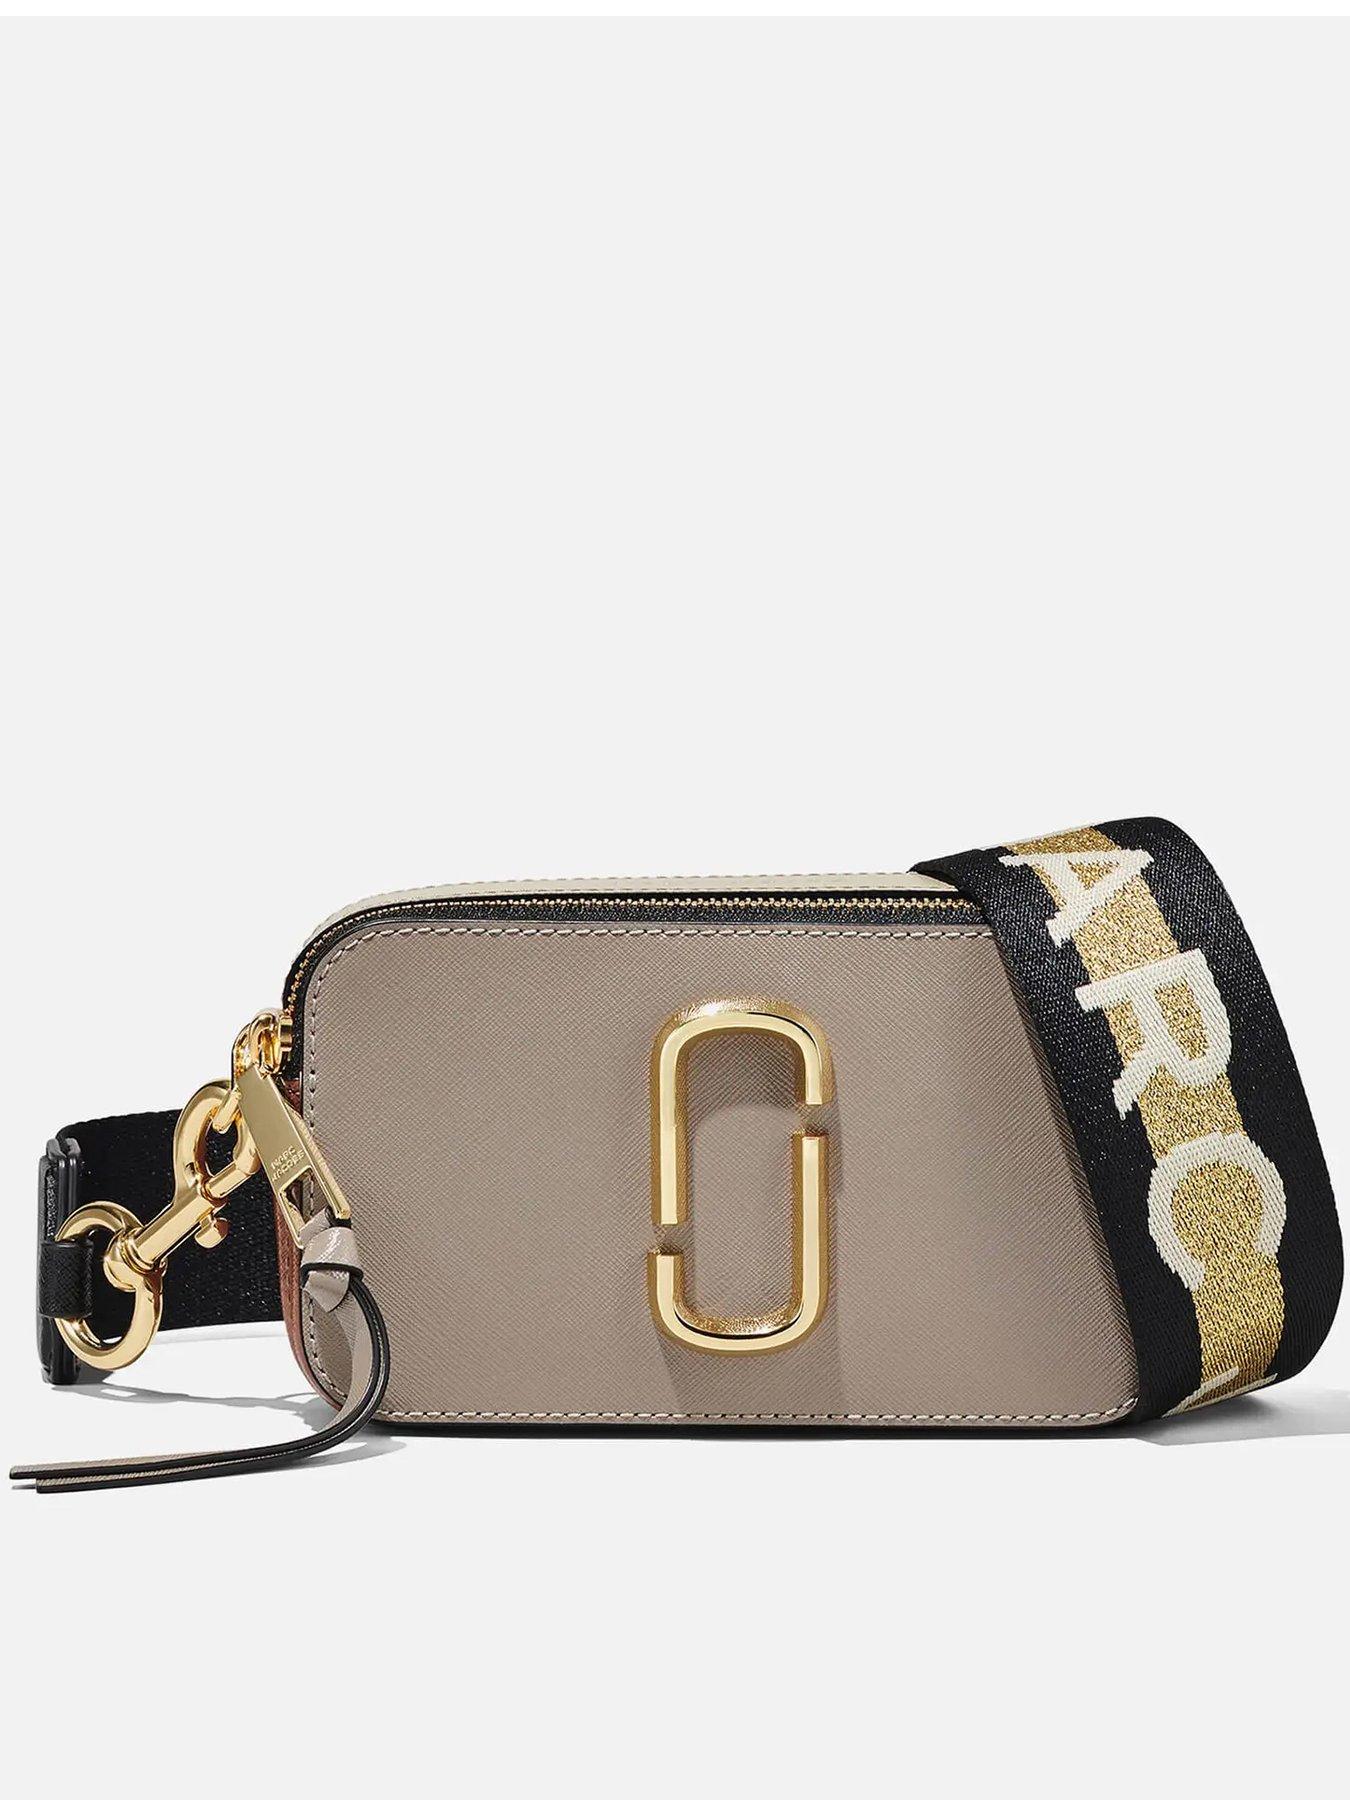 Marc Jacobs Snapshot Leather Crossbody Bag In Brown